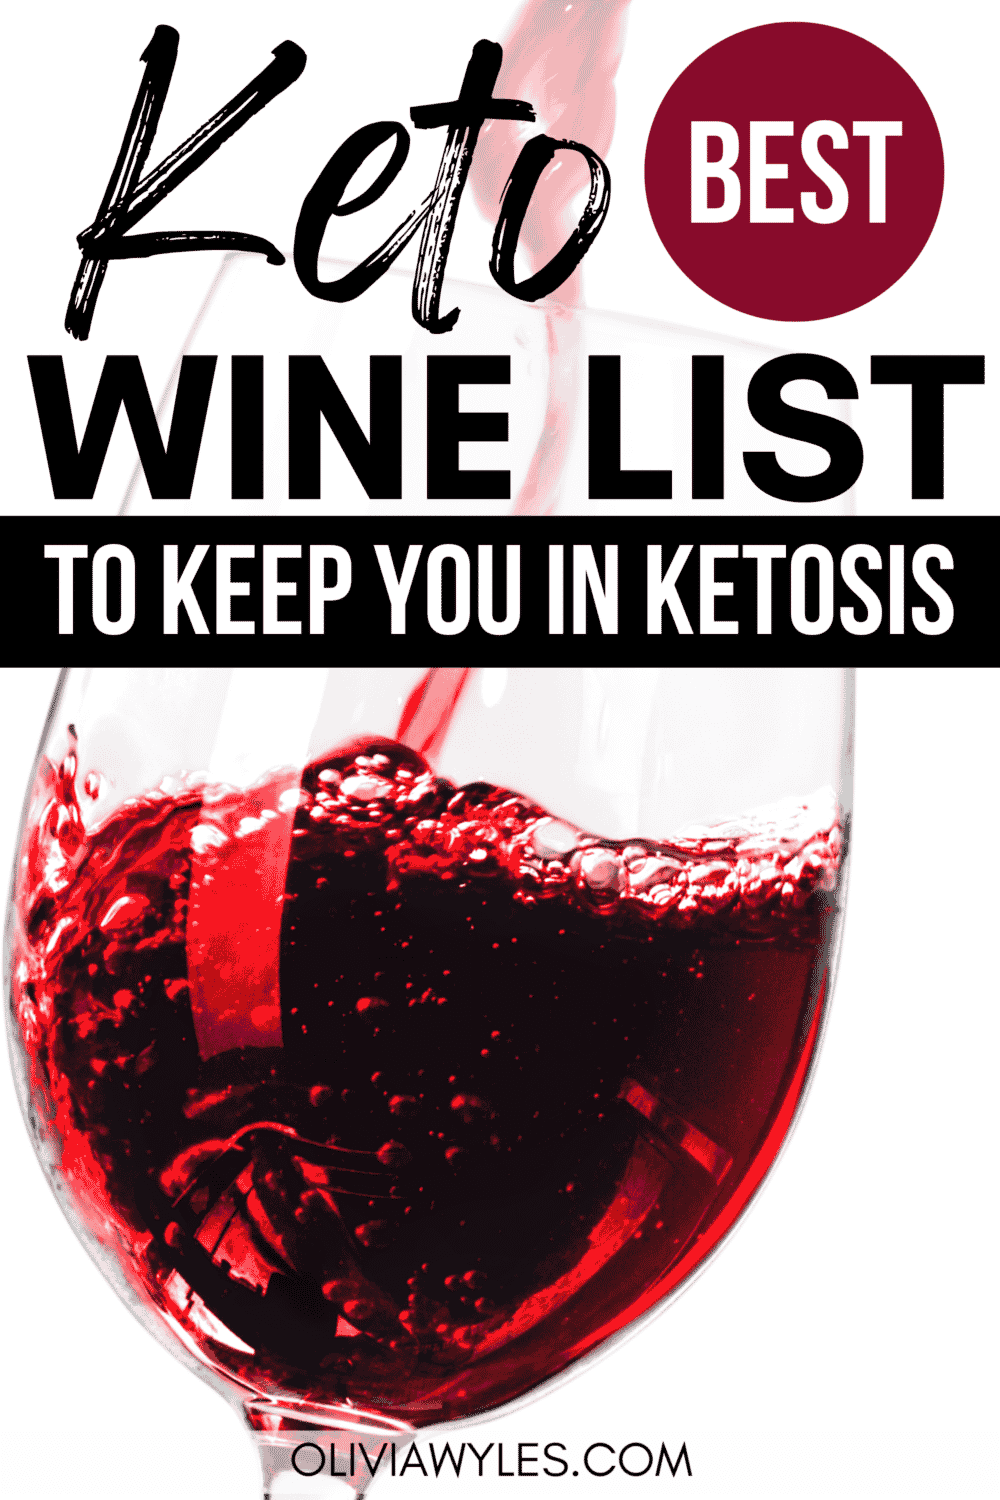 14 Best Wines (Low Carb Guide To Wine)